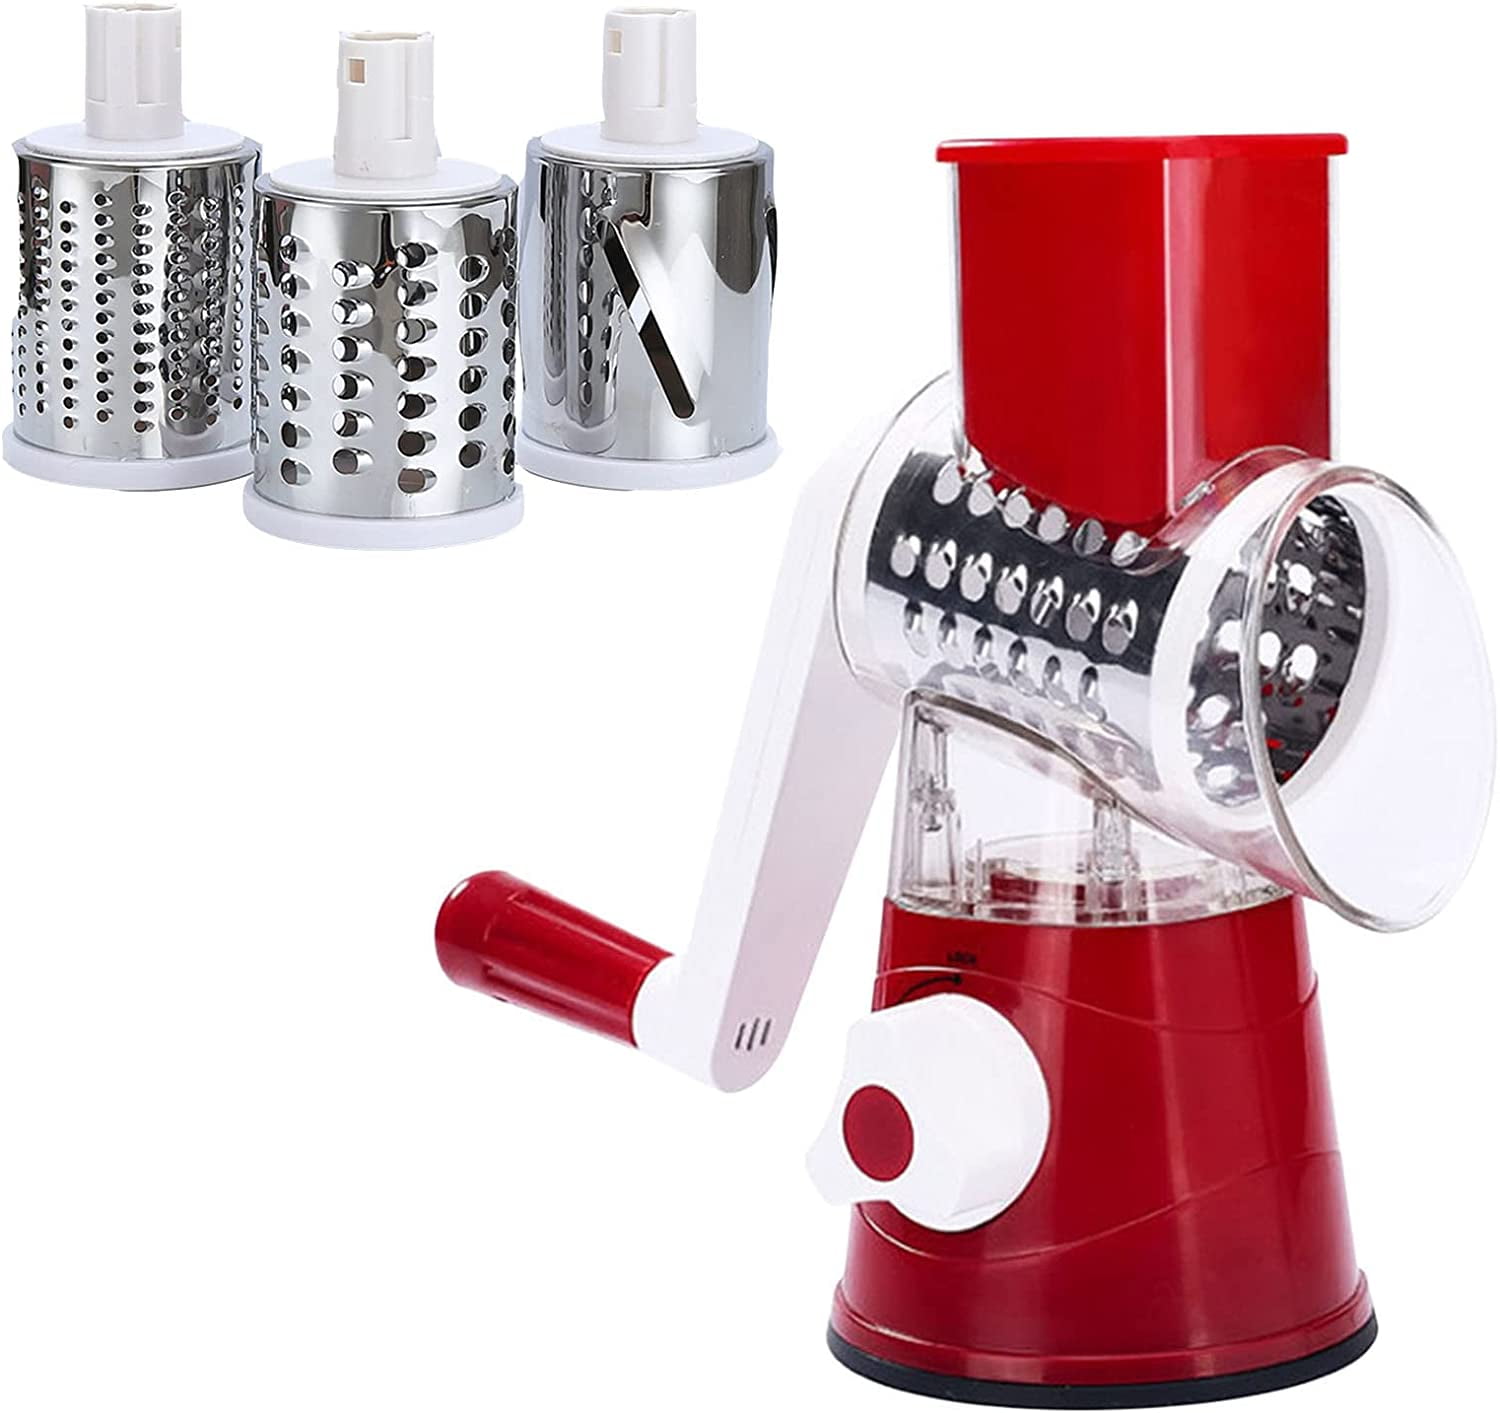 Vegetable Cutter Sumo Slicer With 3 Interchangeable Drums